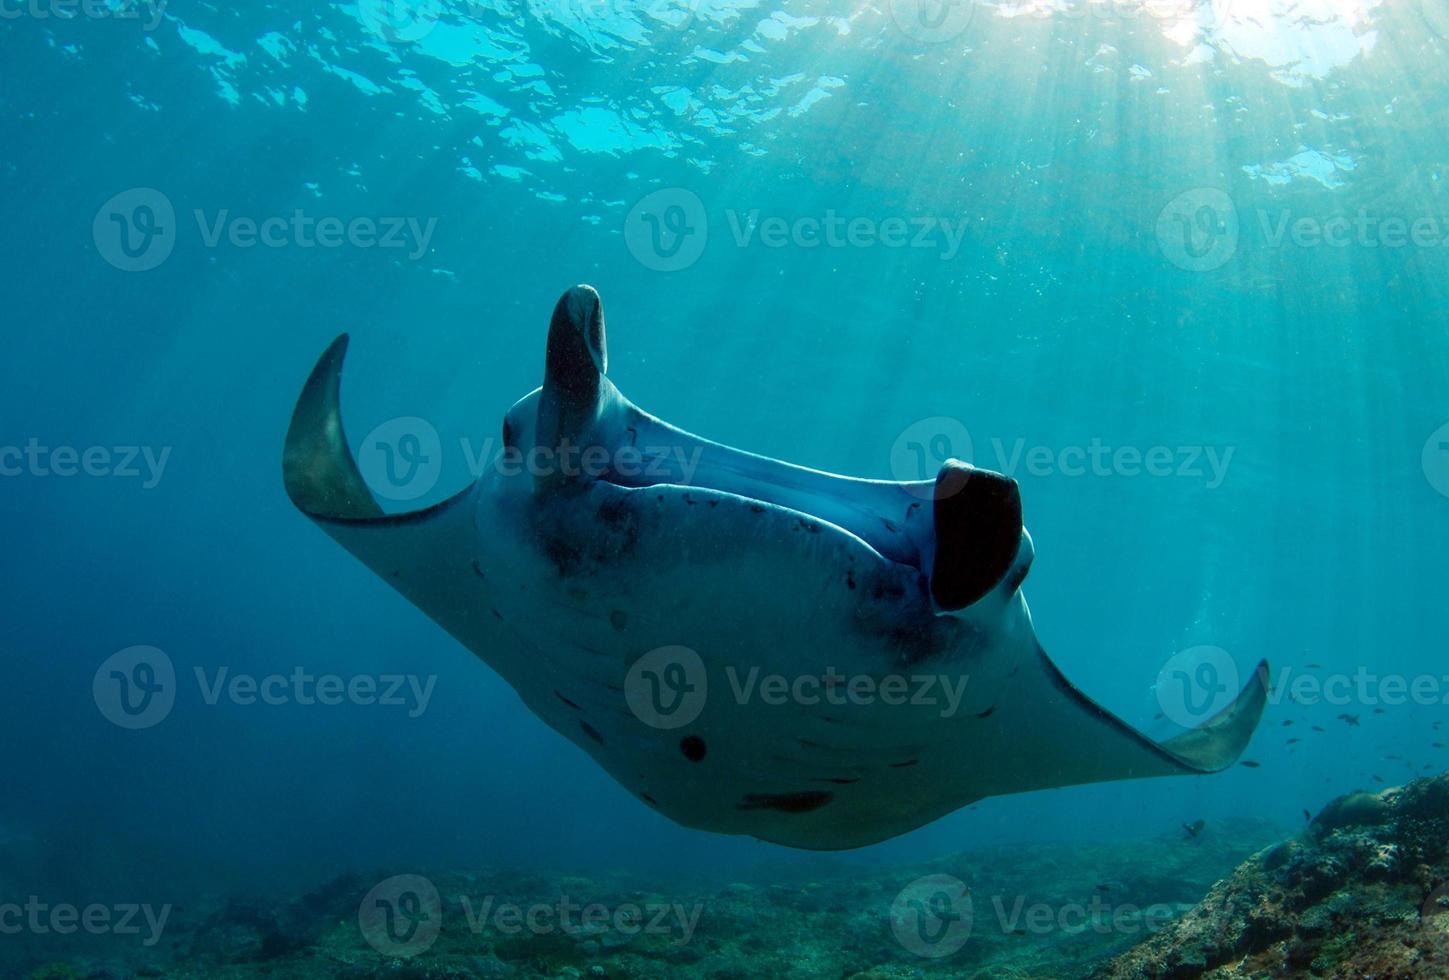 Manta Rays at the cleaning station photo